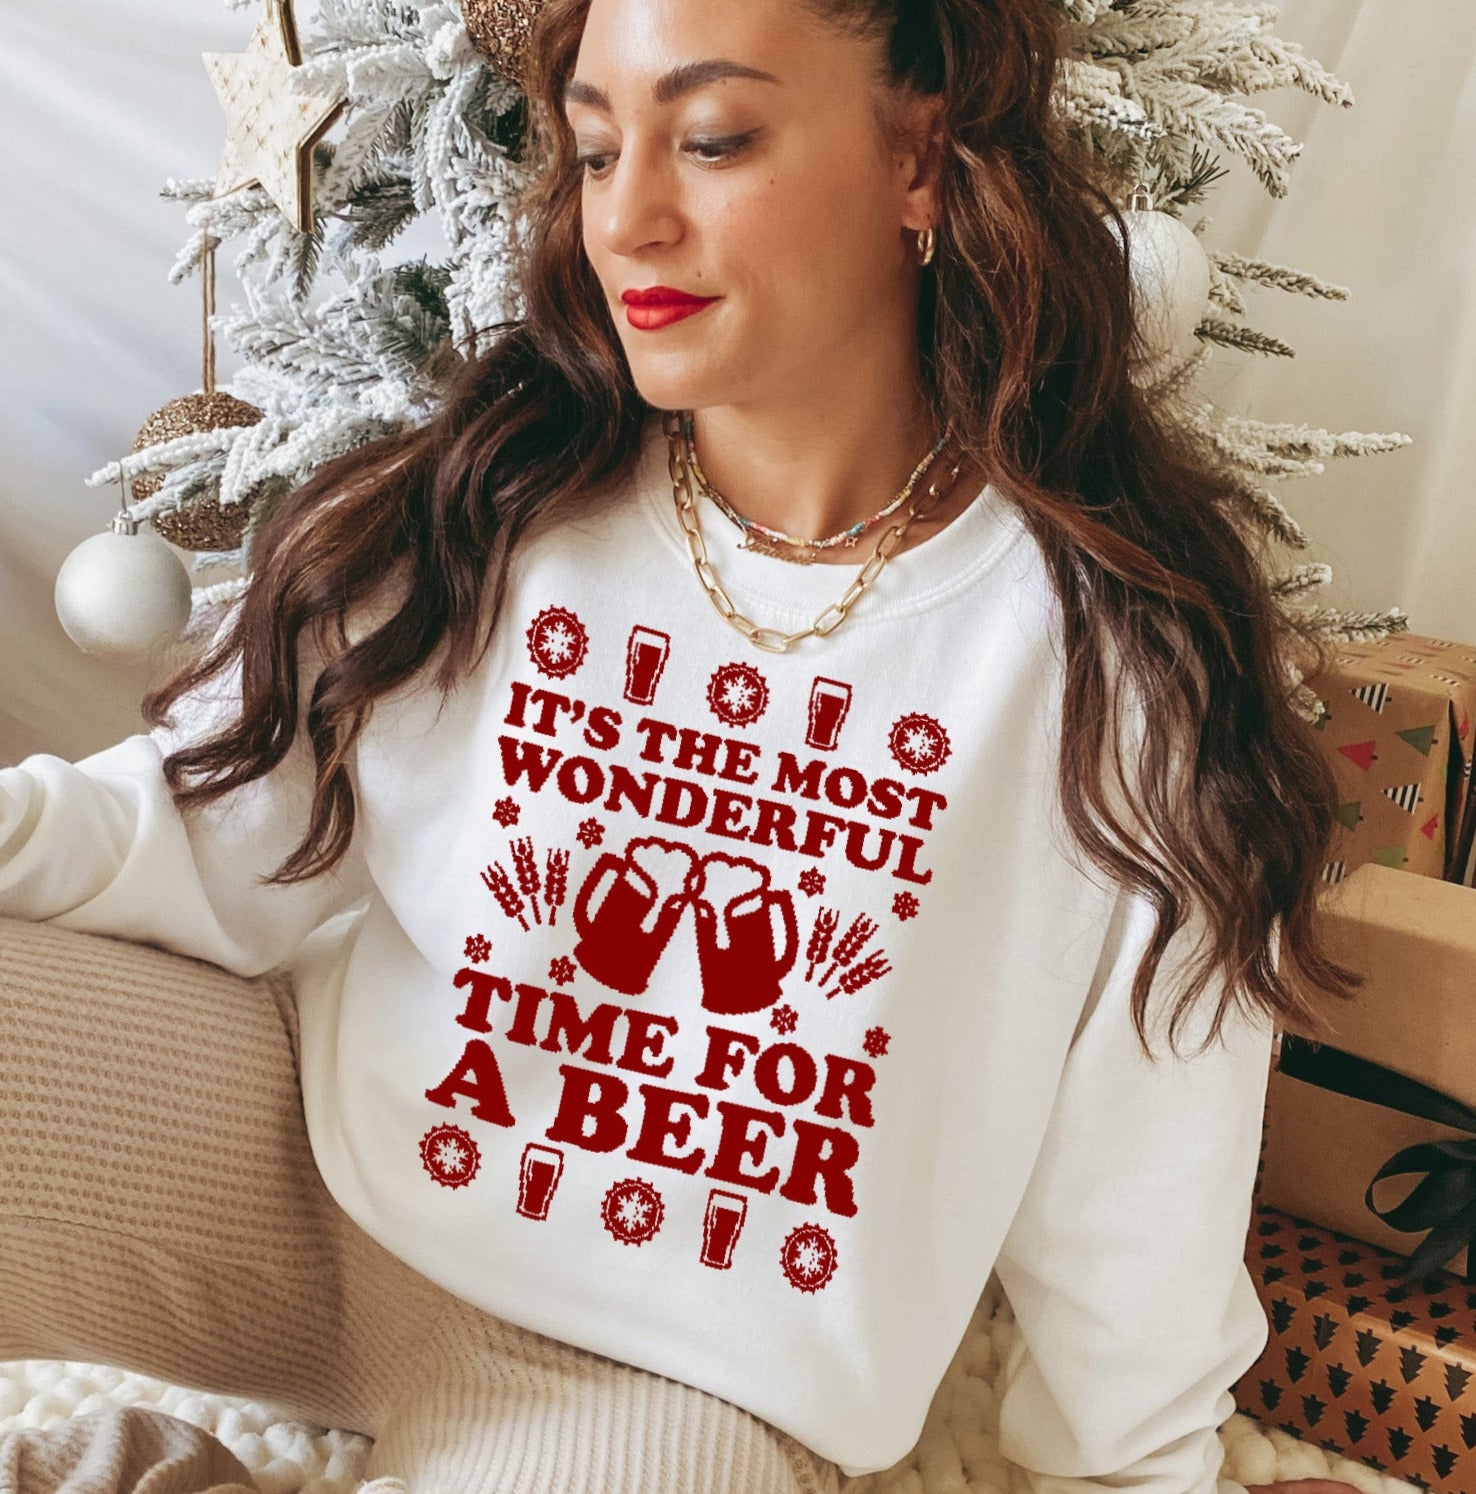 white sweatshirt saying it's the most wondeful time for a beer - HighCiti